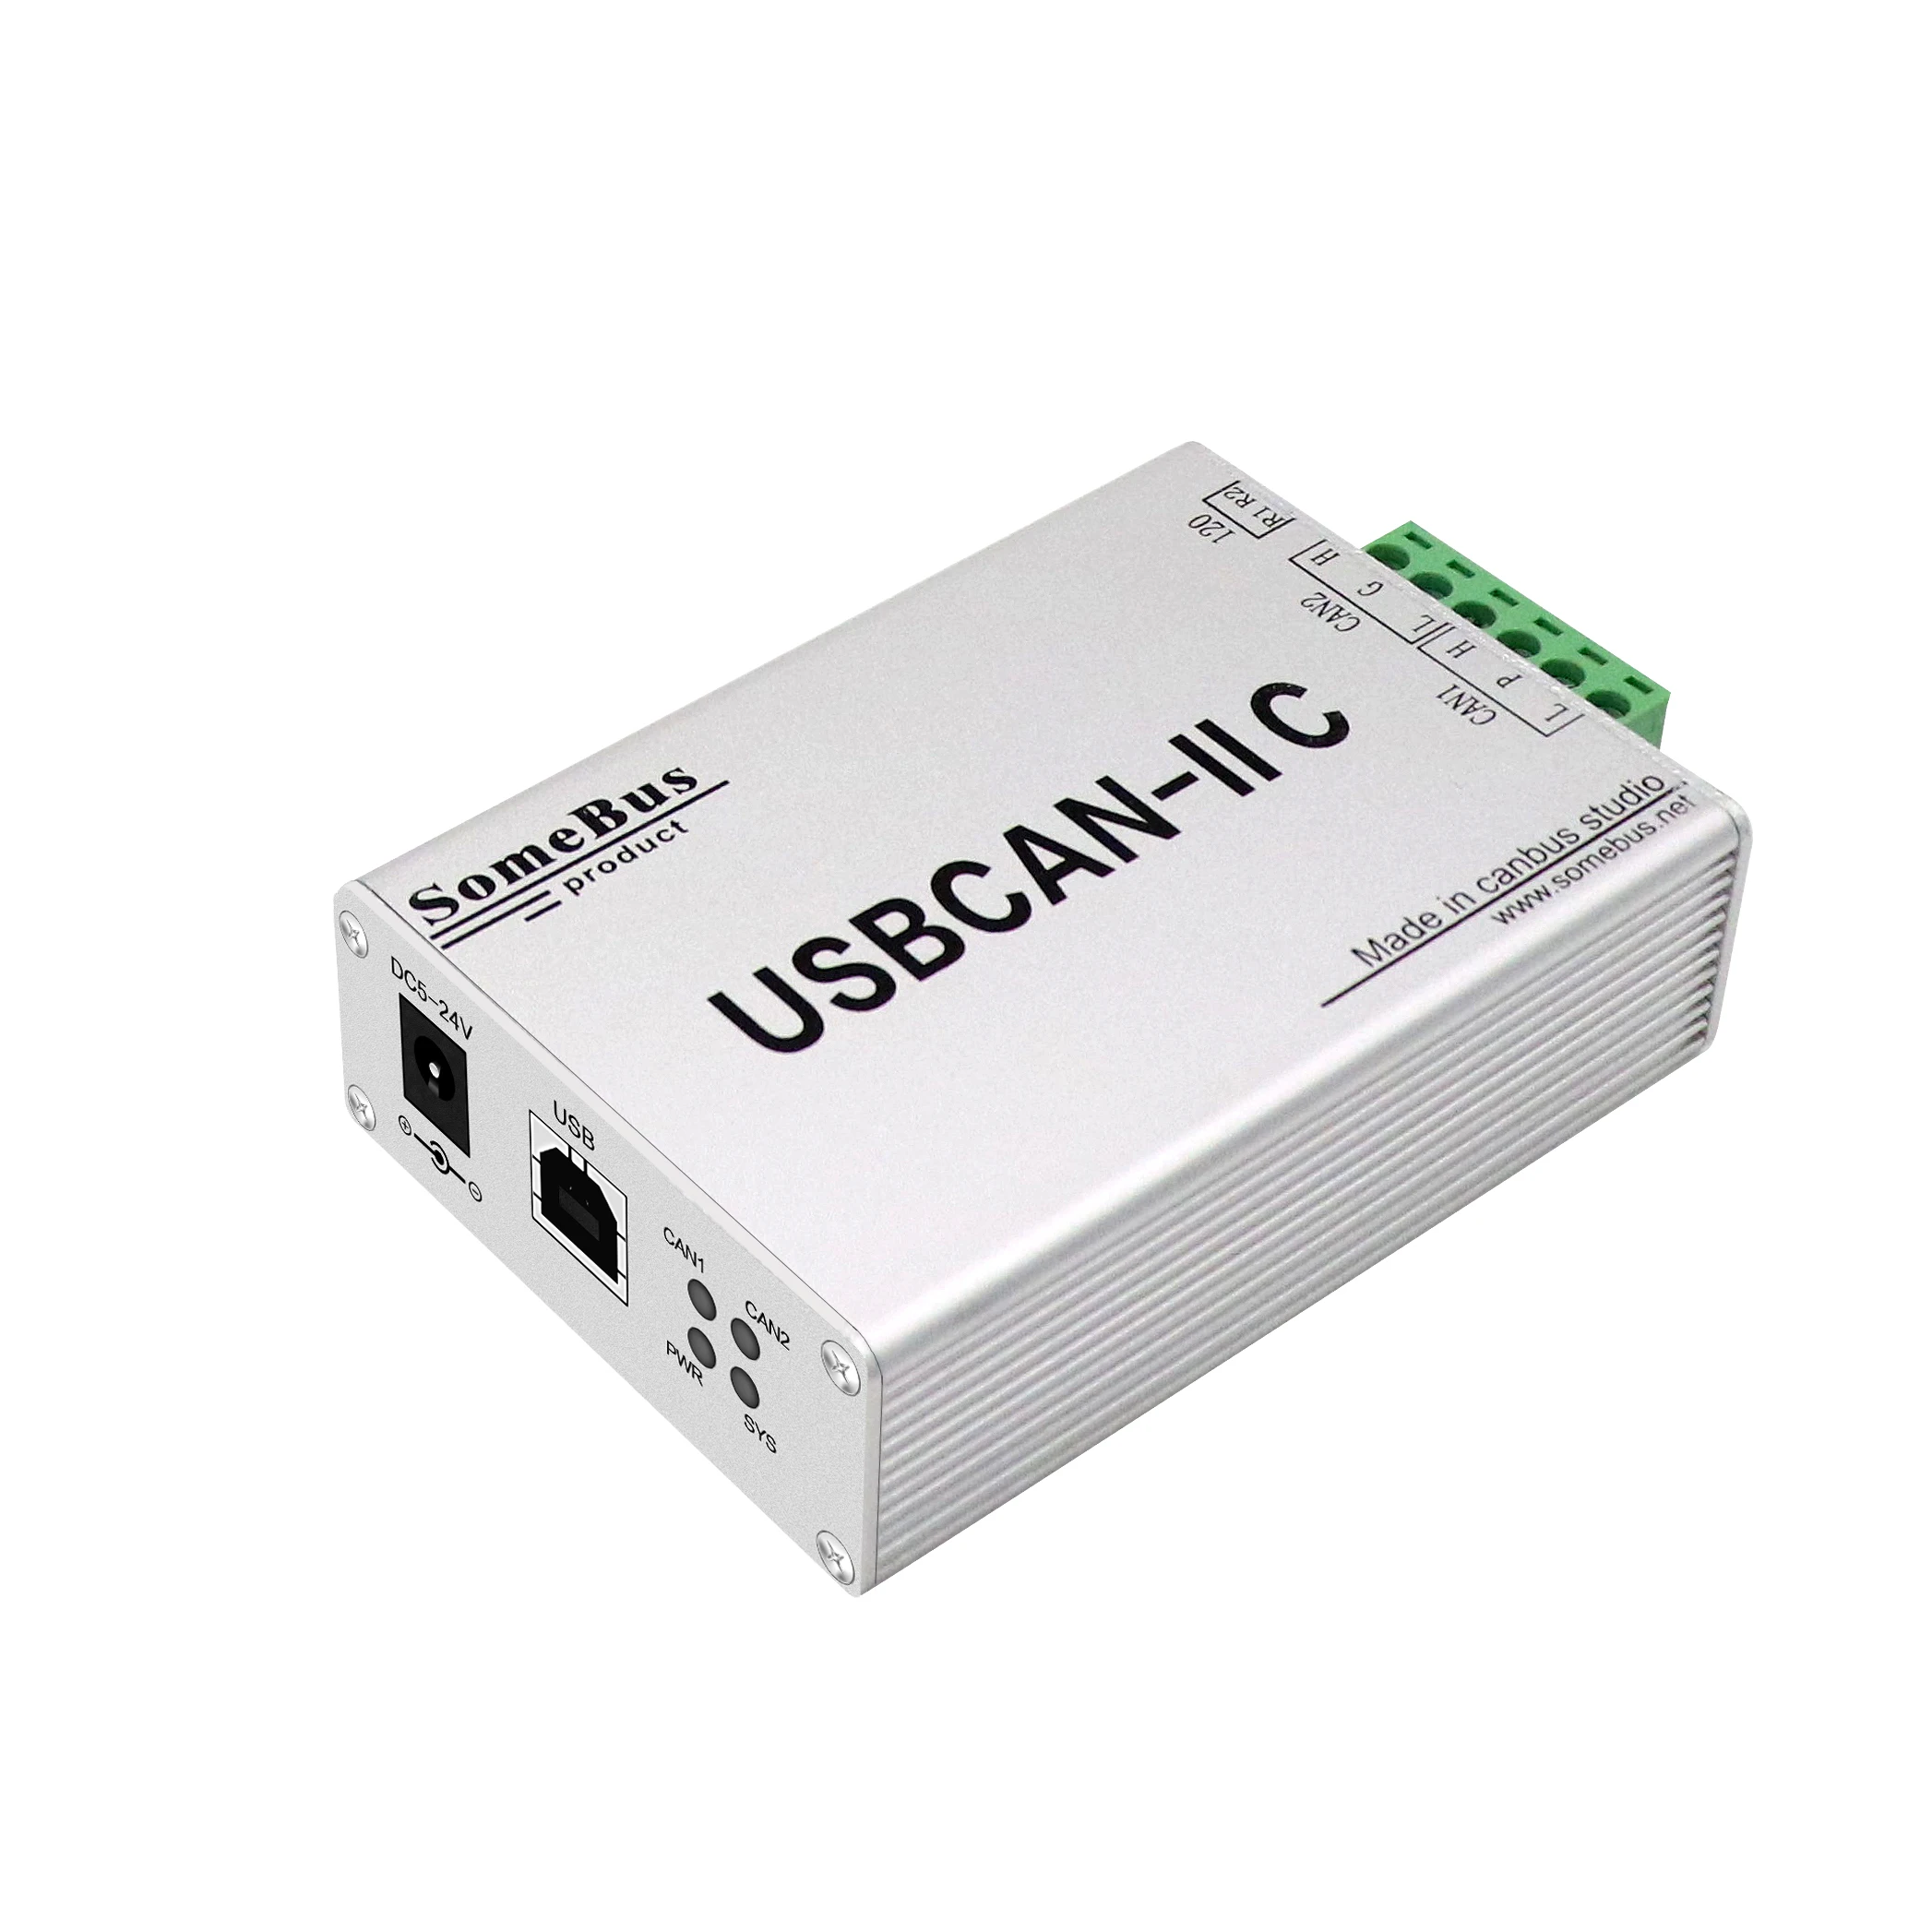 Free shipping II ZLG Bus Analyzer compatible with USBCAN2 USB to CAN module interface card